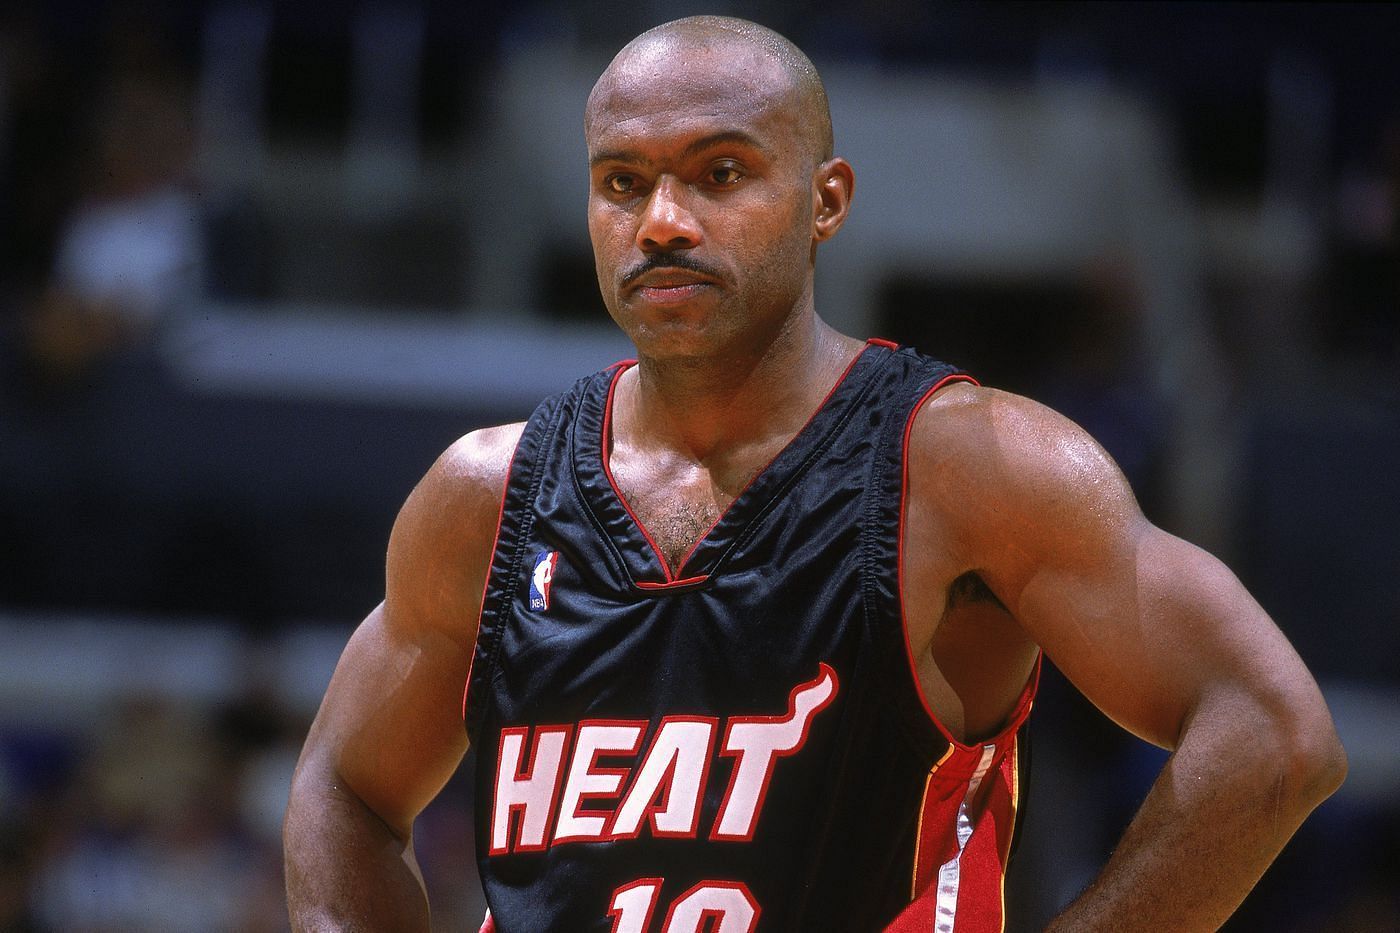 Former five-time All-Star point guard Tim Hardaway